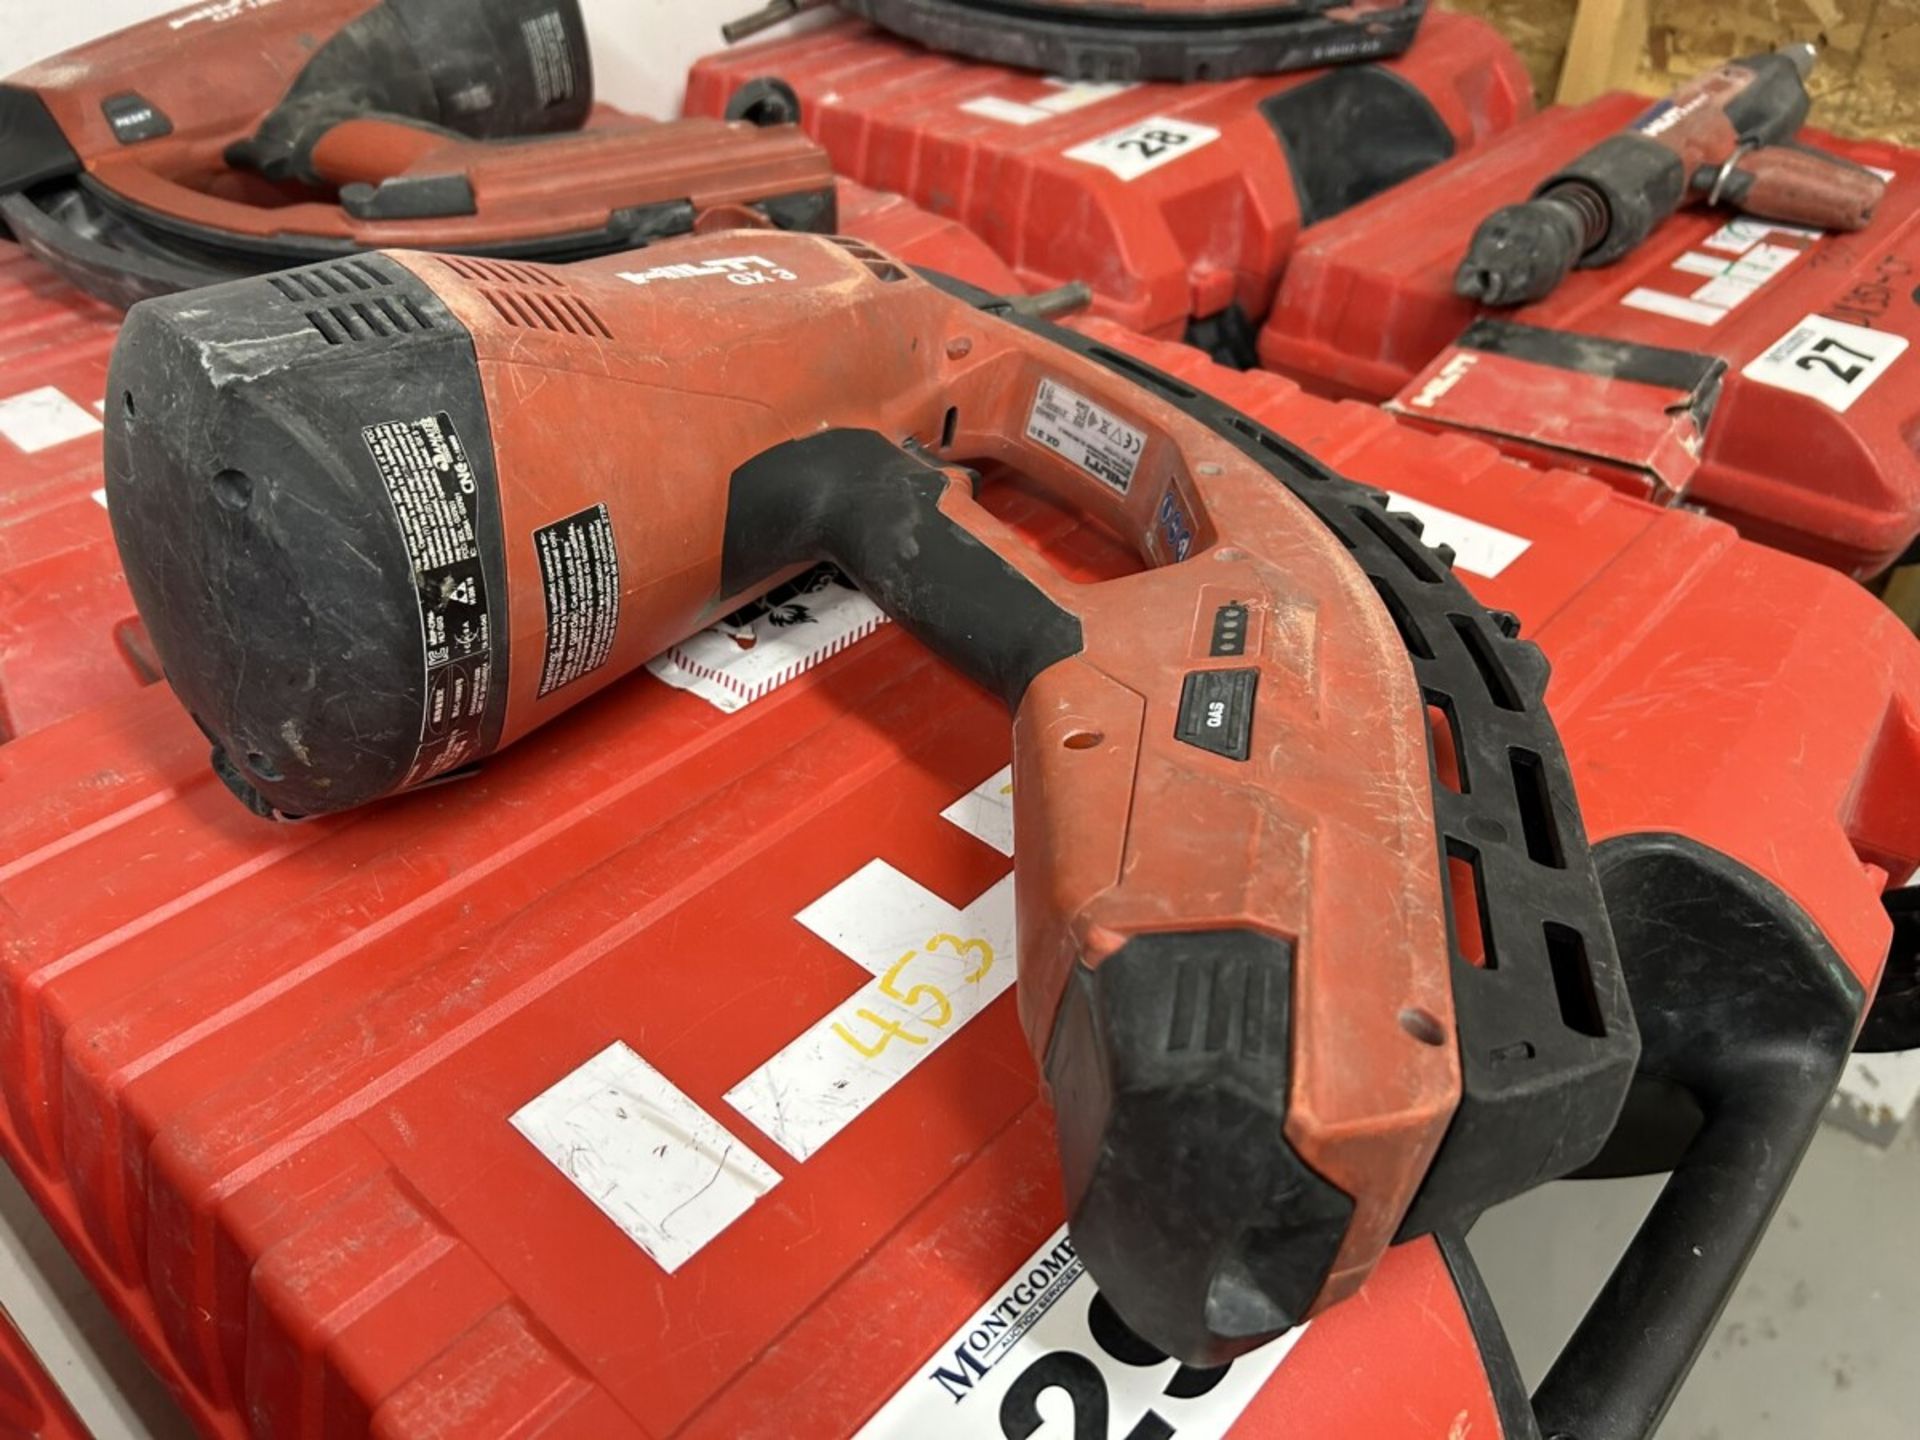 HILTI GX 3 GAS-ACTUATED FASTENING TOOL GAS NAILER WITH SINGLE POWER SOURCE FOR DRYWALL TRACK, - Image 5 of 7